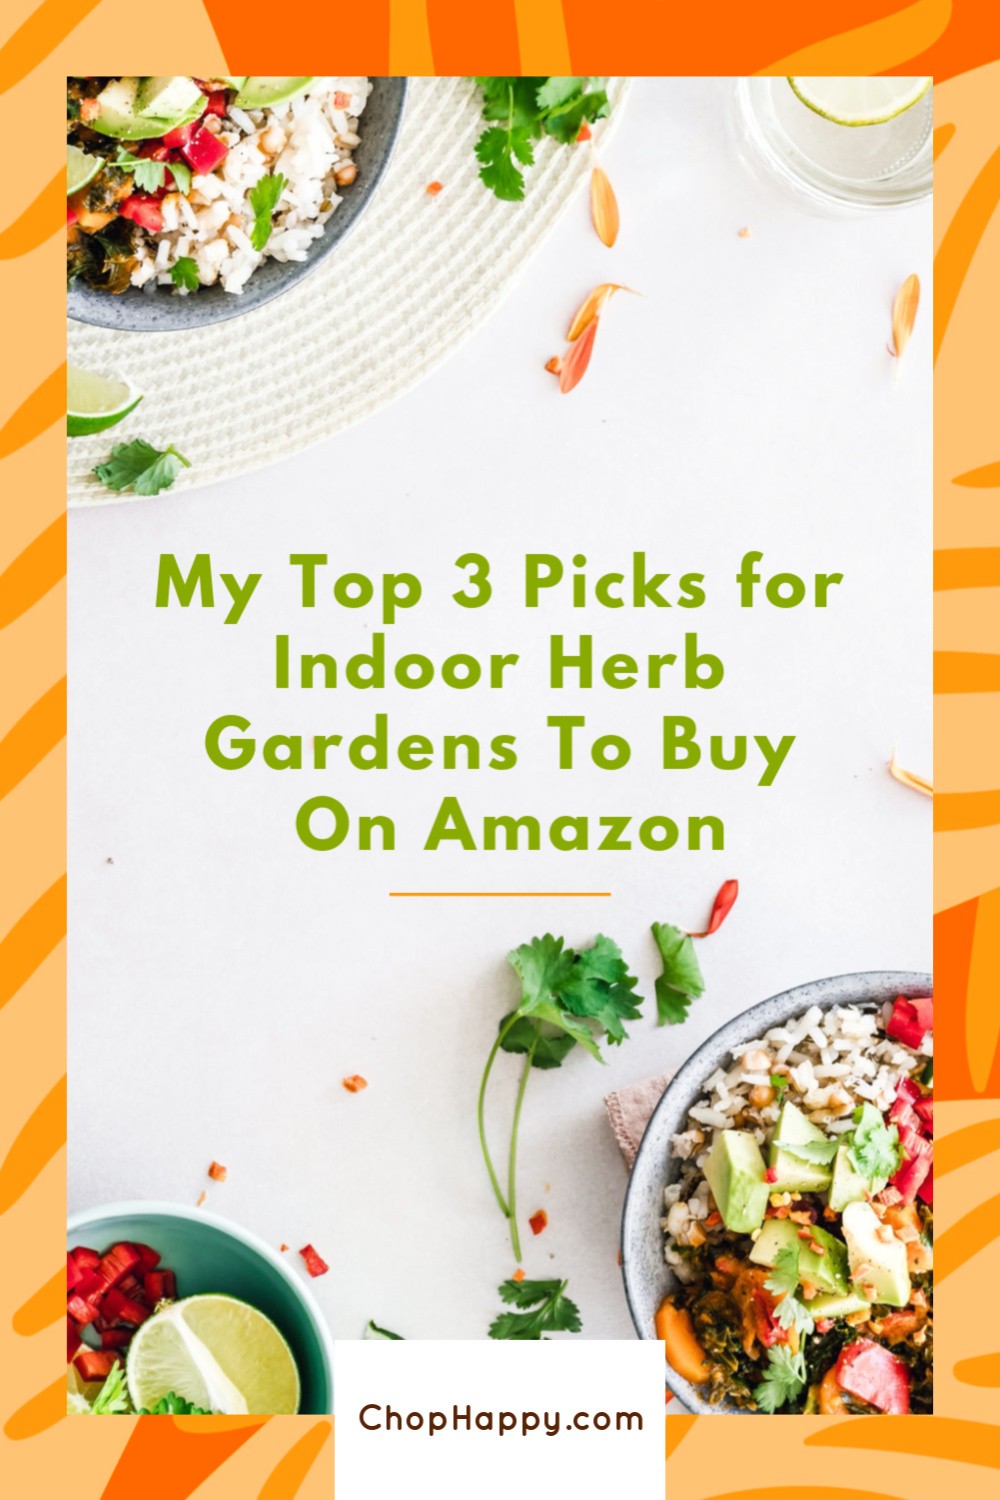 My Top 3 Picks for Indoor Herb Gardens To Buy On Amazon. Grow fresh herbs indoors. I live in a apartment in the city and growing indoor gardens gives me instant access to fresh basil, thyme, mint, parsley, and cilantro. Happy gardening. www.Chophappy.com #indoorgarden #freshherbs